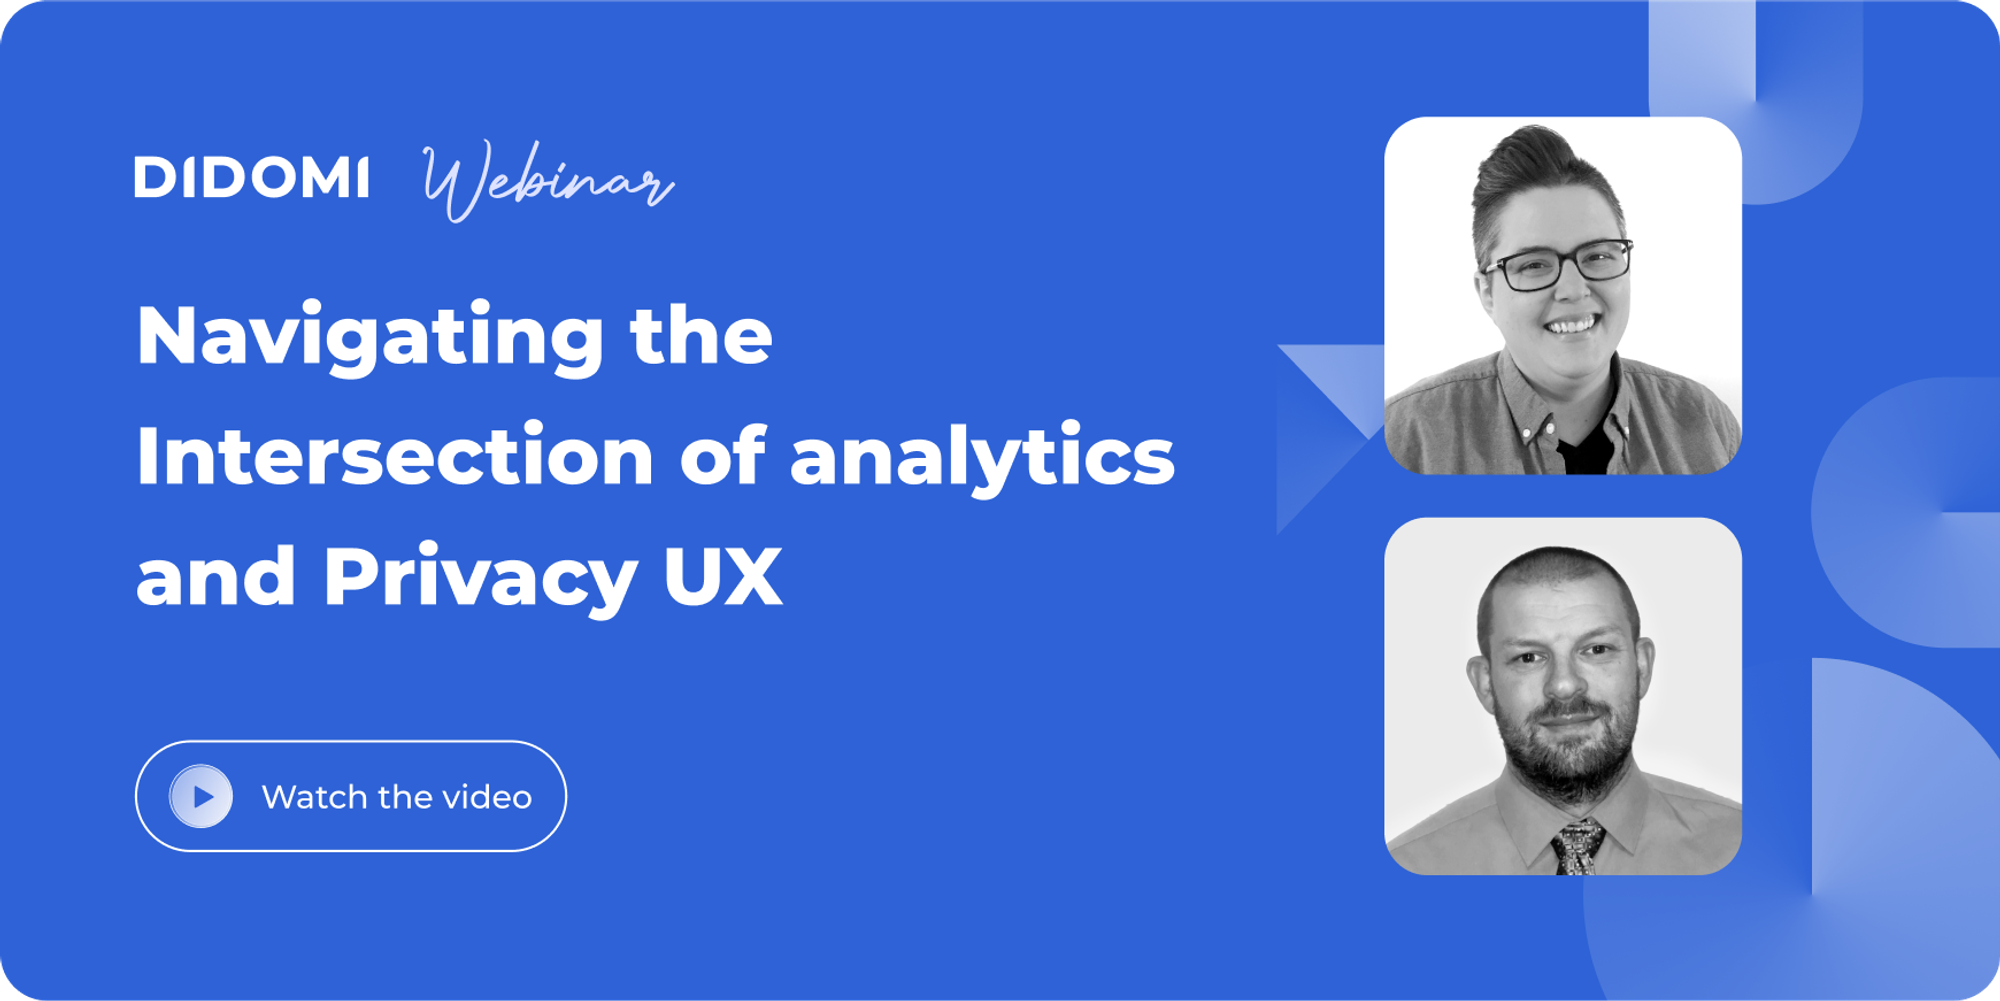 Didomi - Navigating the intersection of analytics and Privacy UX webinar